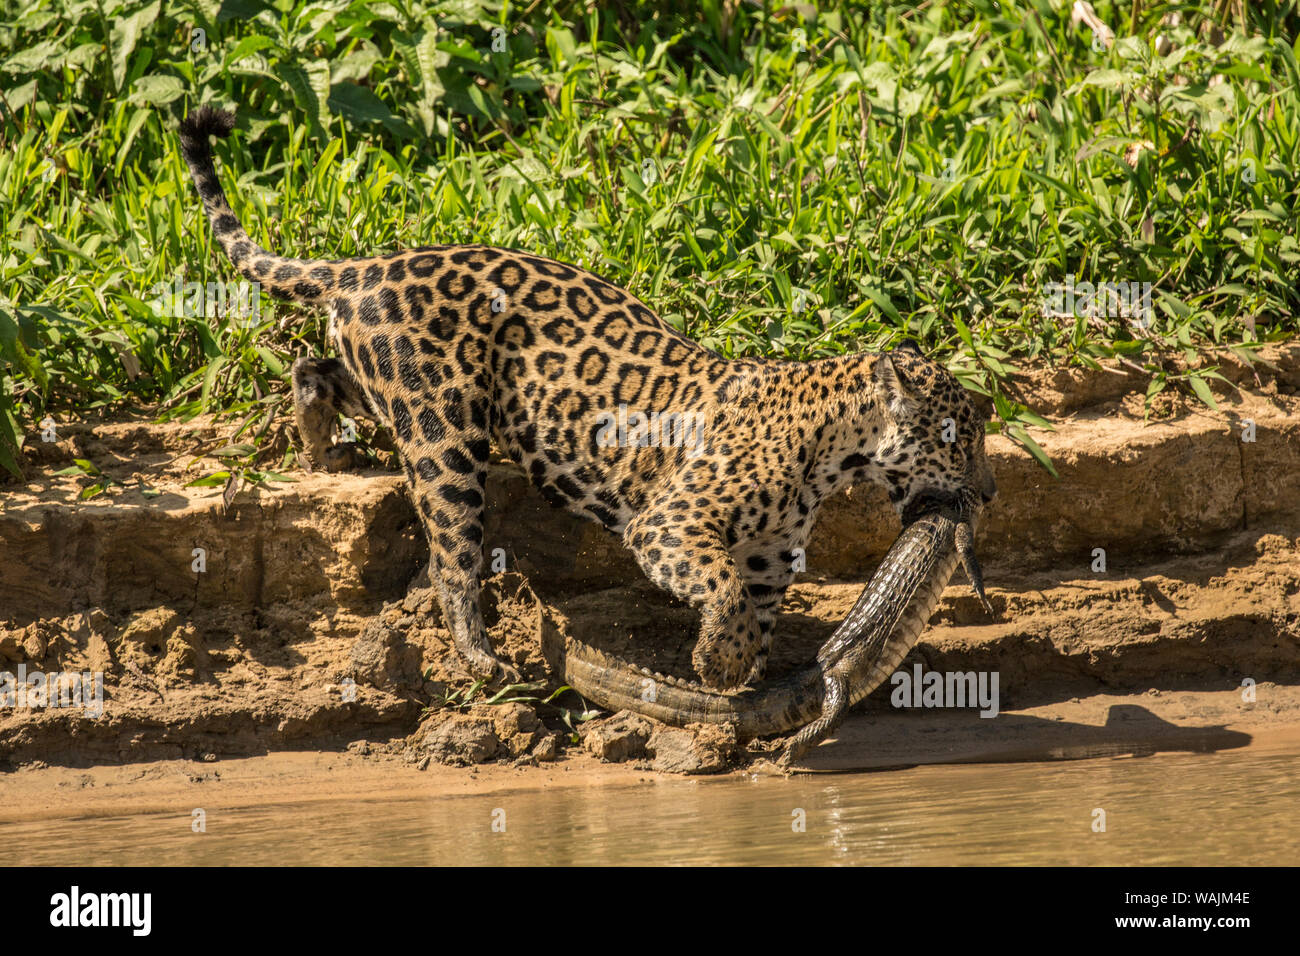 Female jaguar carrying a young Yacare Caiman that Pantanal, Mato Grosso, Brazil. she just caught, on her way to sharing it with her two adolescent jaguars, along the Cuiaba River. Stock Photo